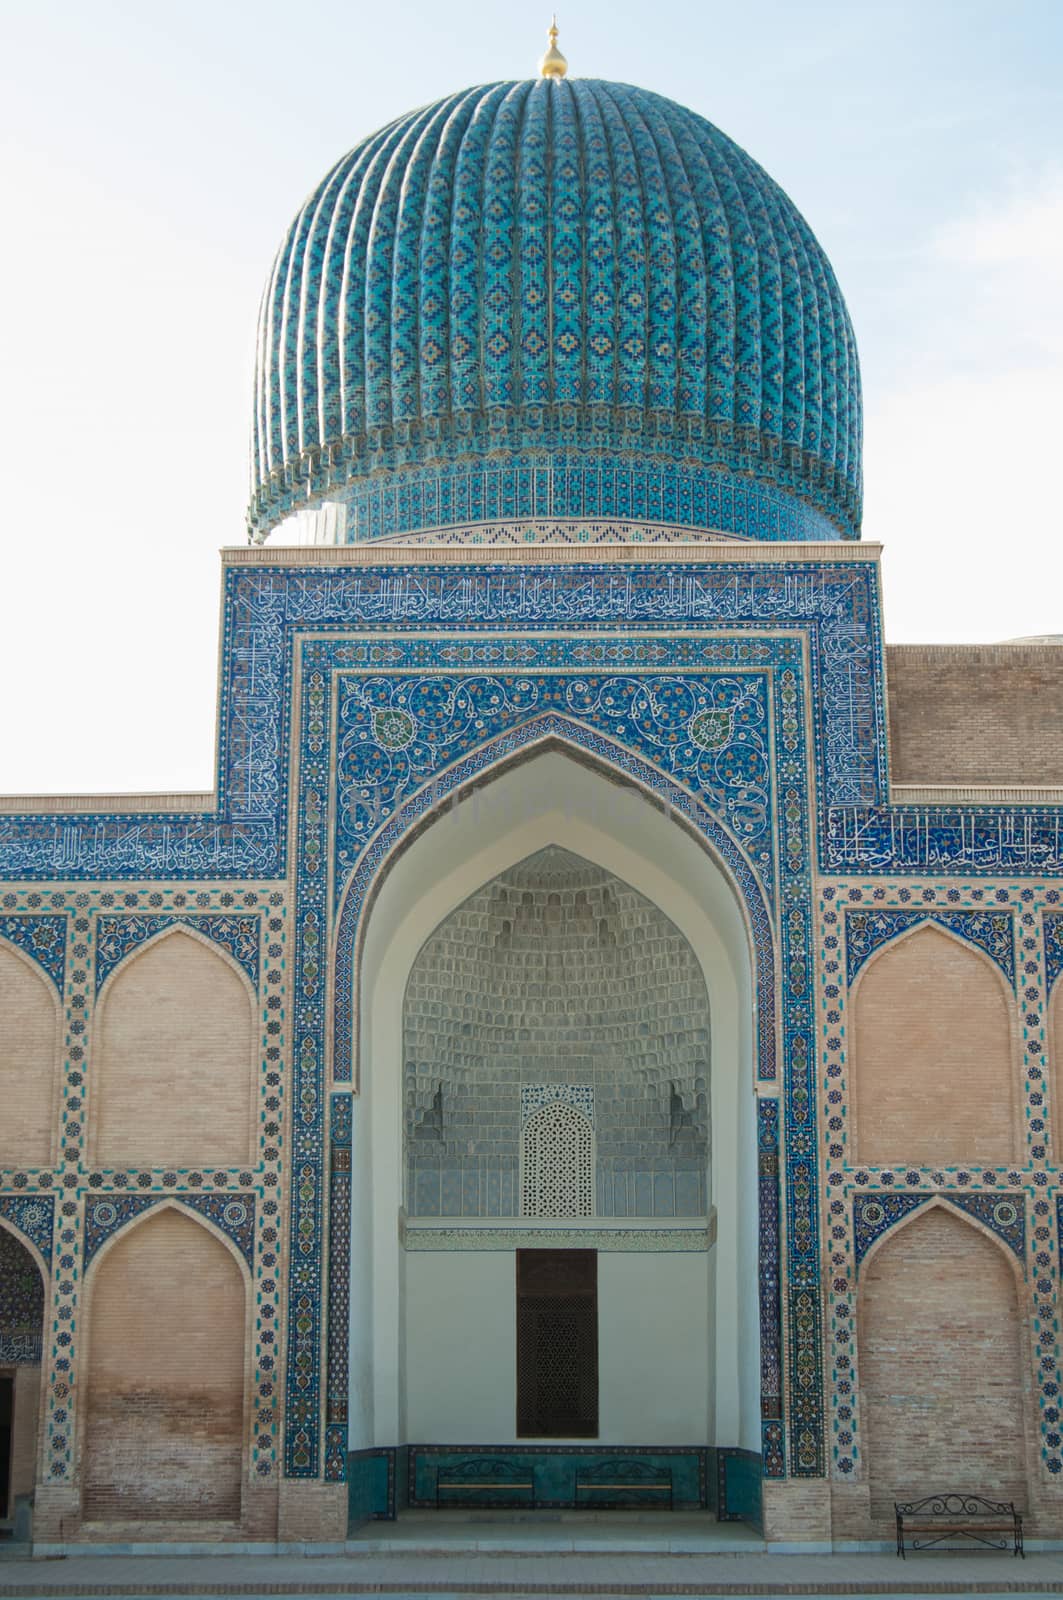 closeup of the dome of the mausoleum of Tamerlane. ancient architecture of Central Asia